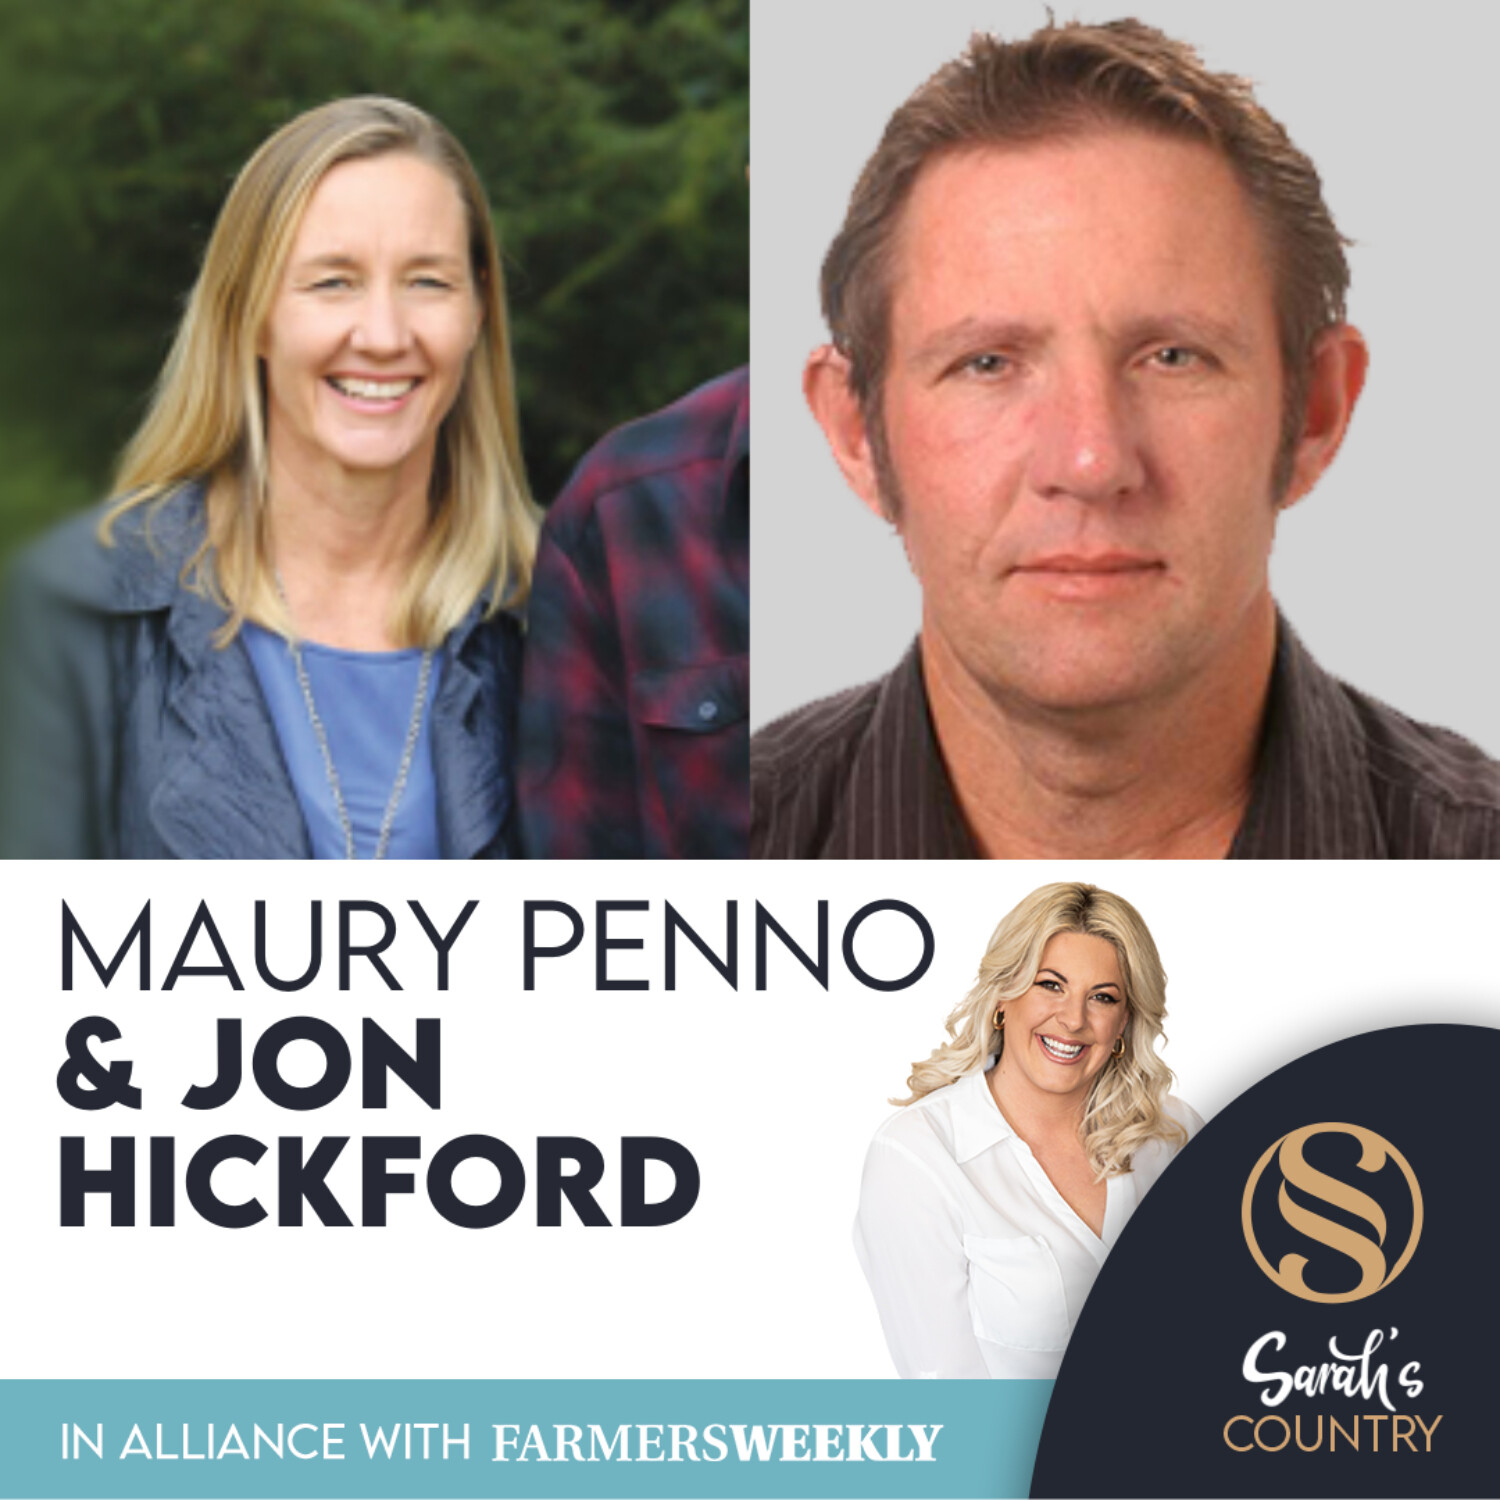 Maury Leyland Penno & Jon Hickford | “The future of regenerative agriculture in NZ”